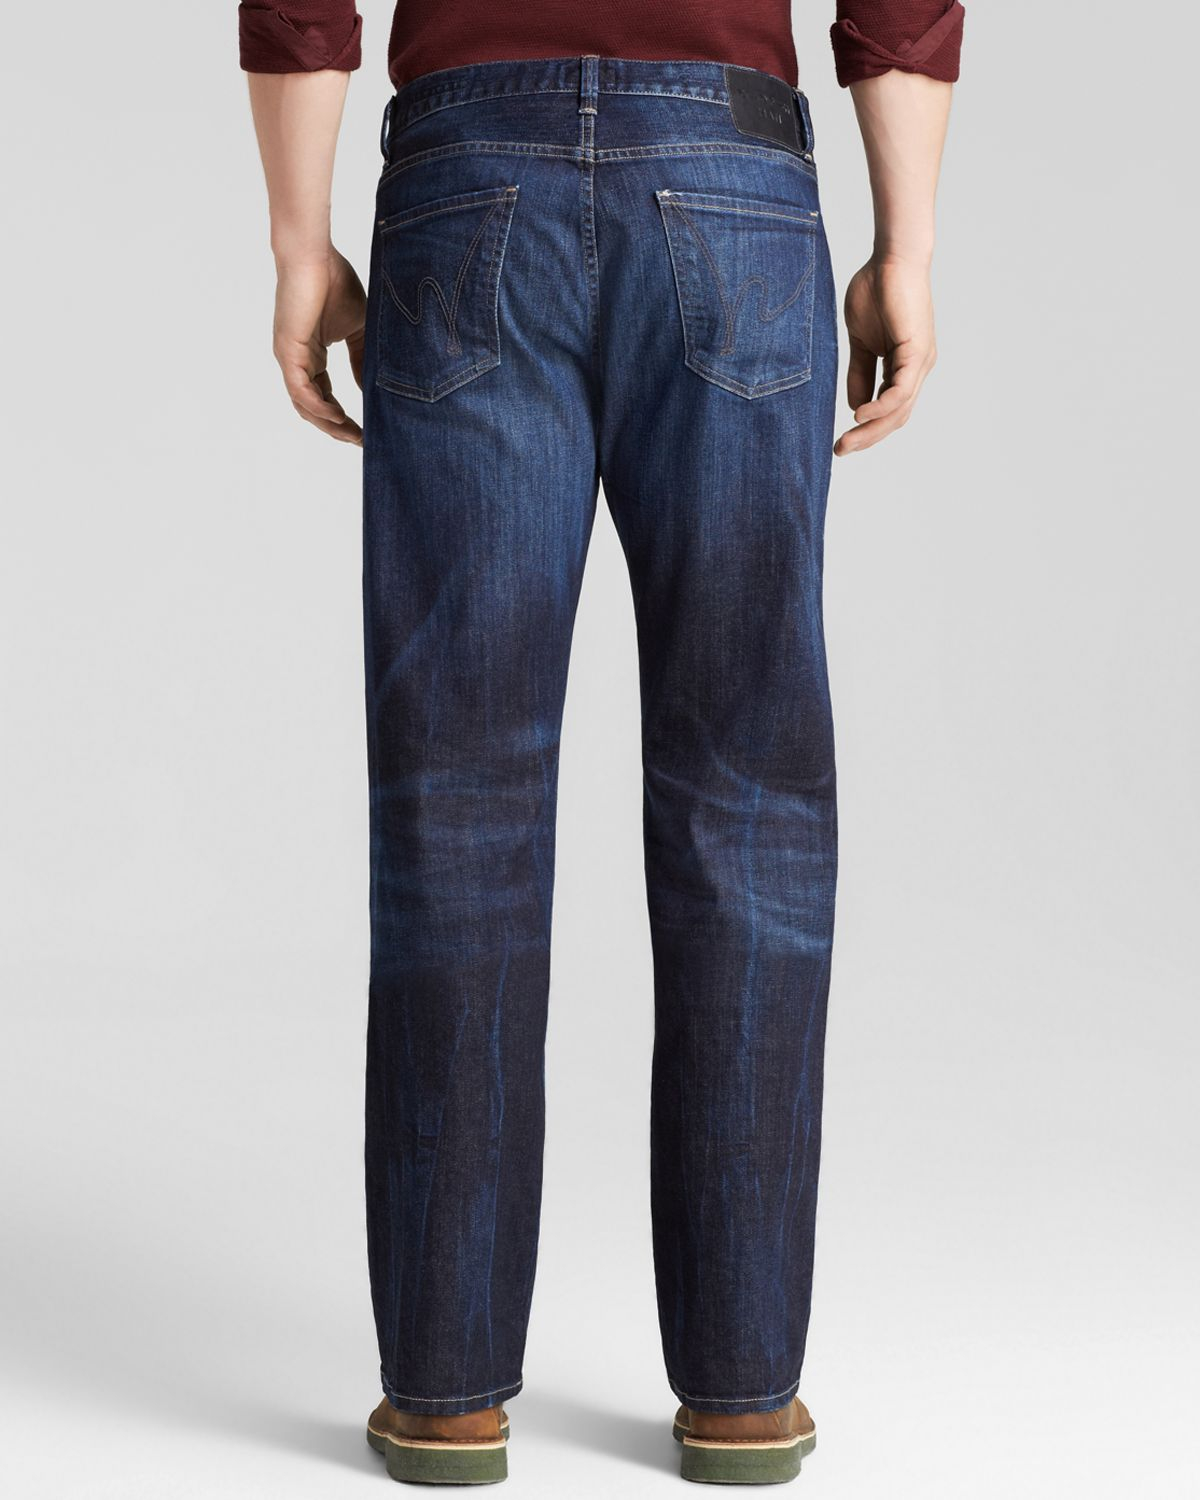 Lyst - Citizens Of Humanity Jeans - Evans Relaxed Fit In Dorian in Blue ...